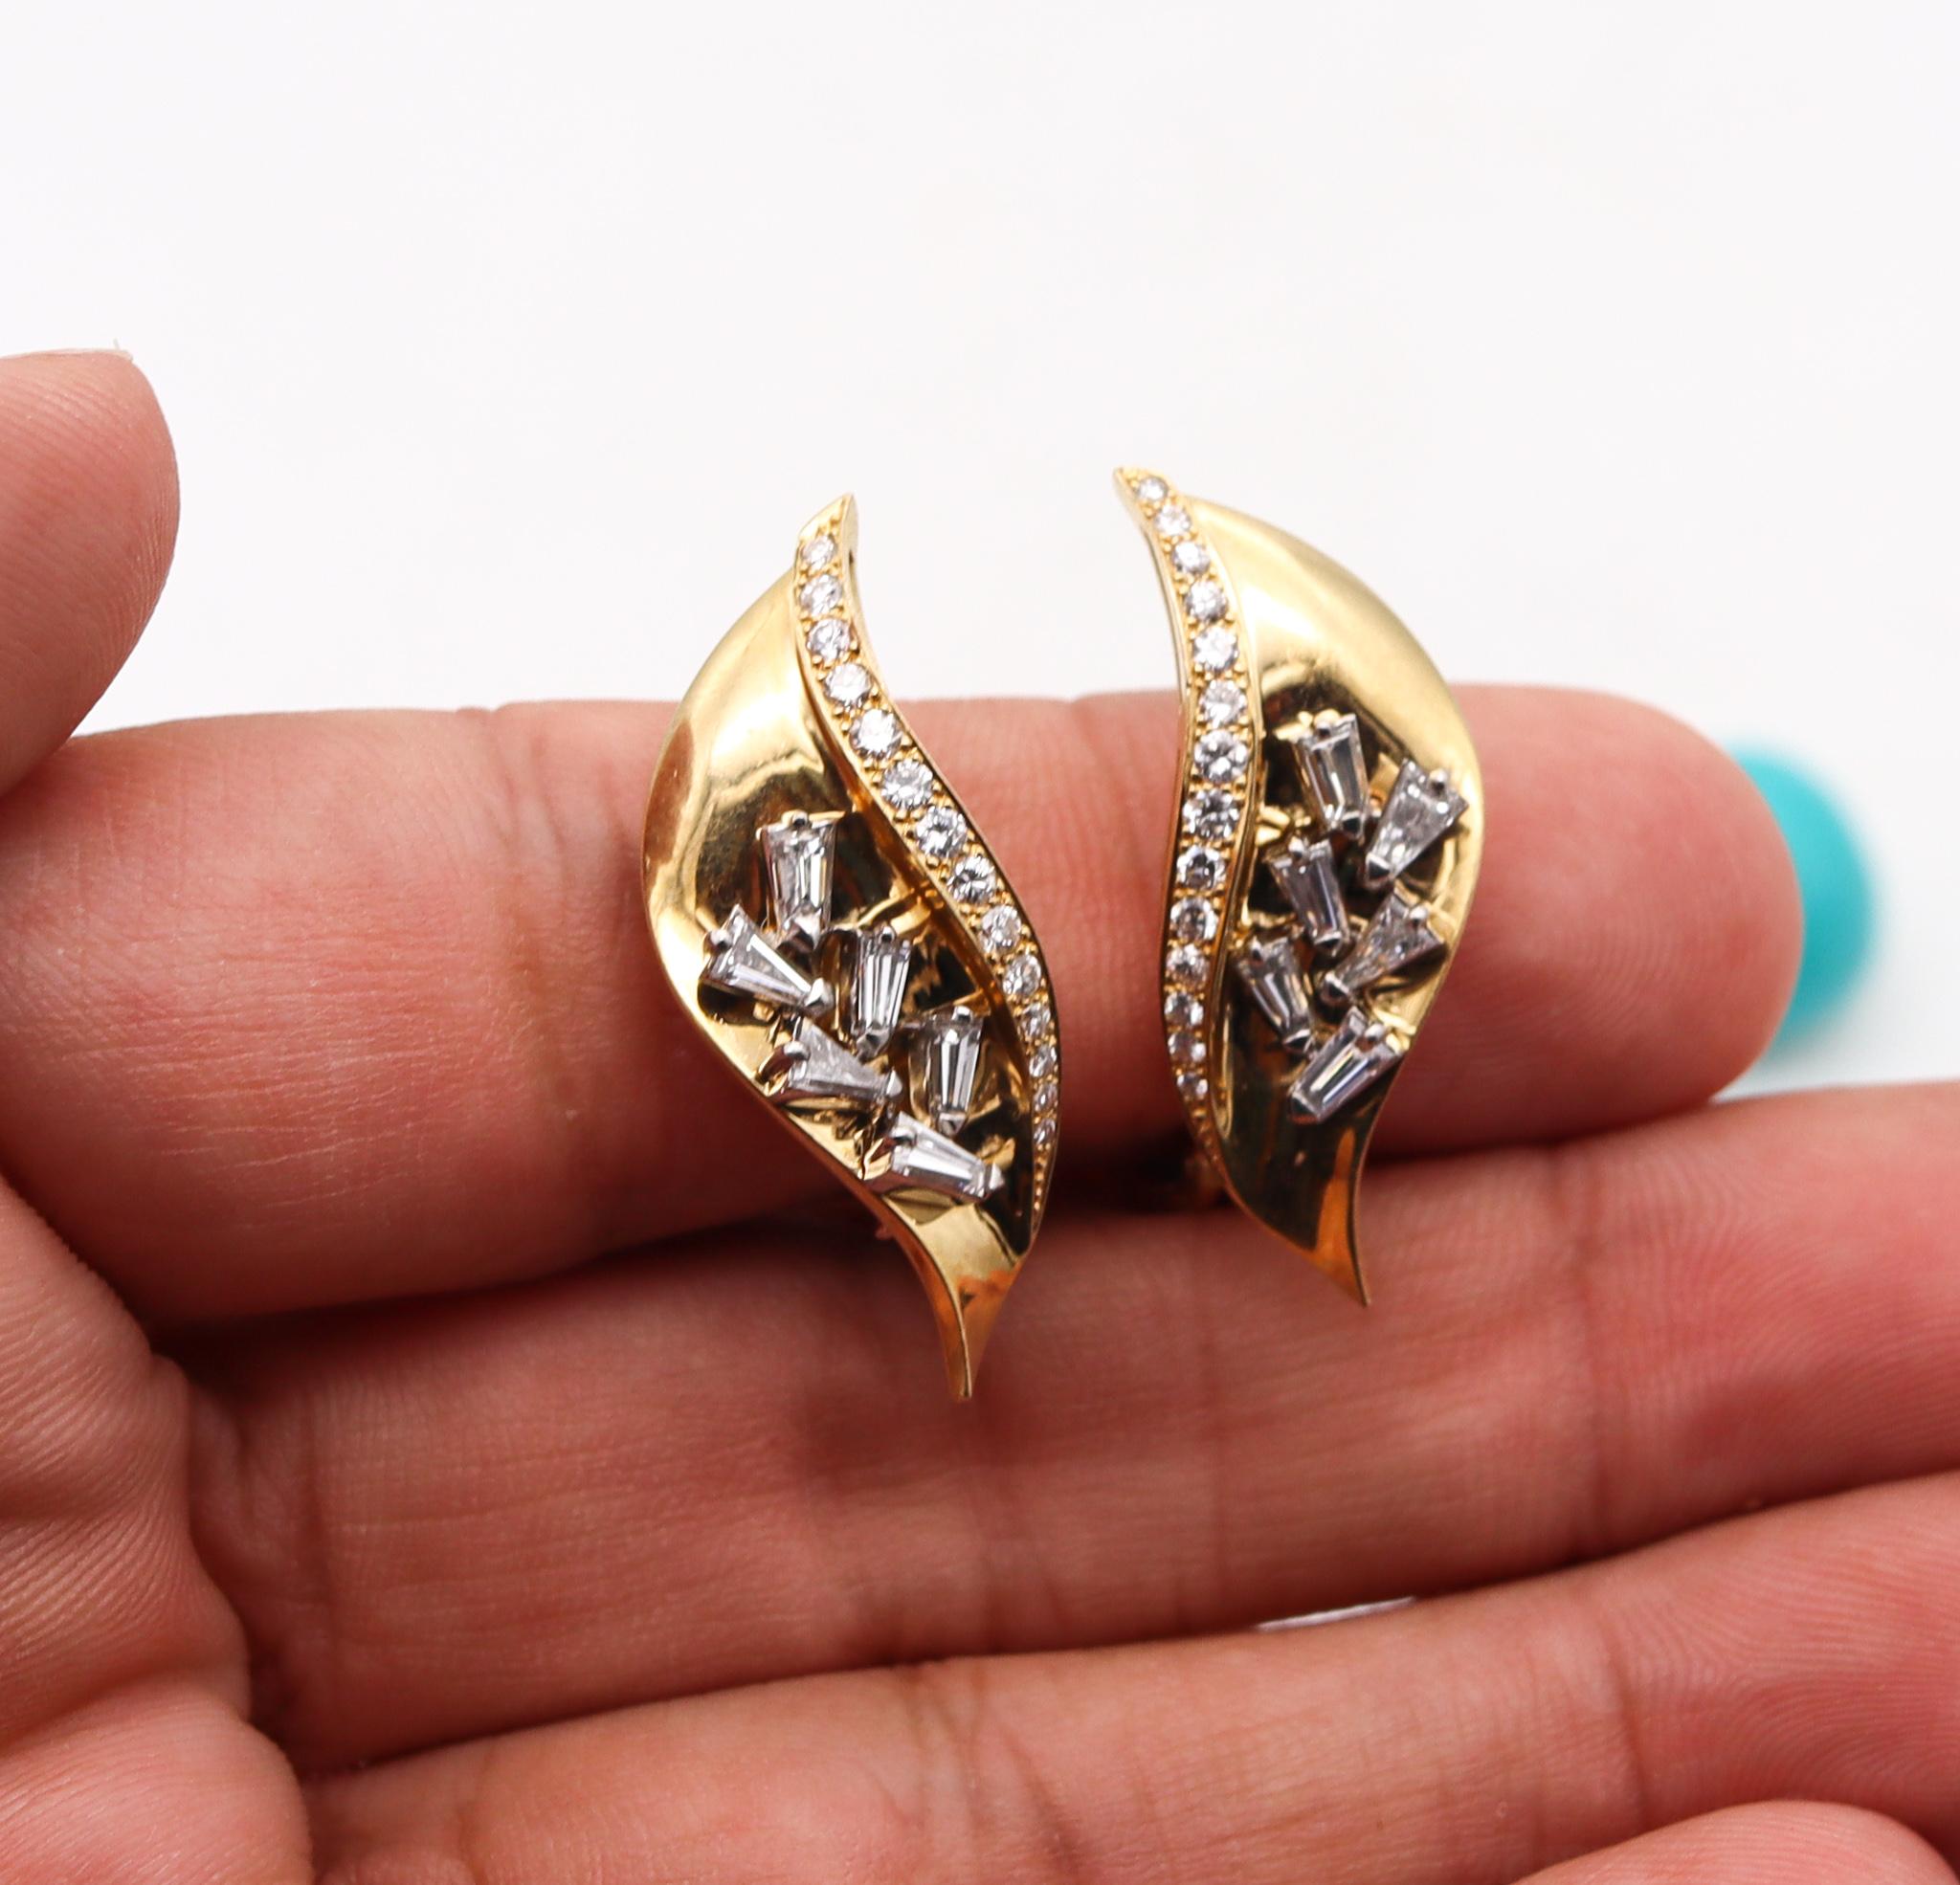 Guillemin & Soulaine Paris Convertible Earrings in 18kt Gold Platinum & Diamonds In Excellent Condition For Sale In Miami, FL